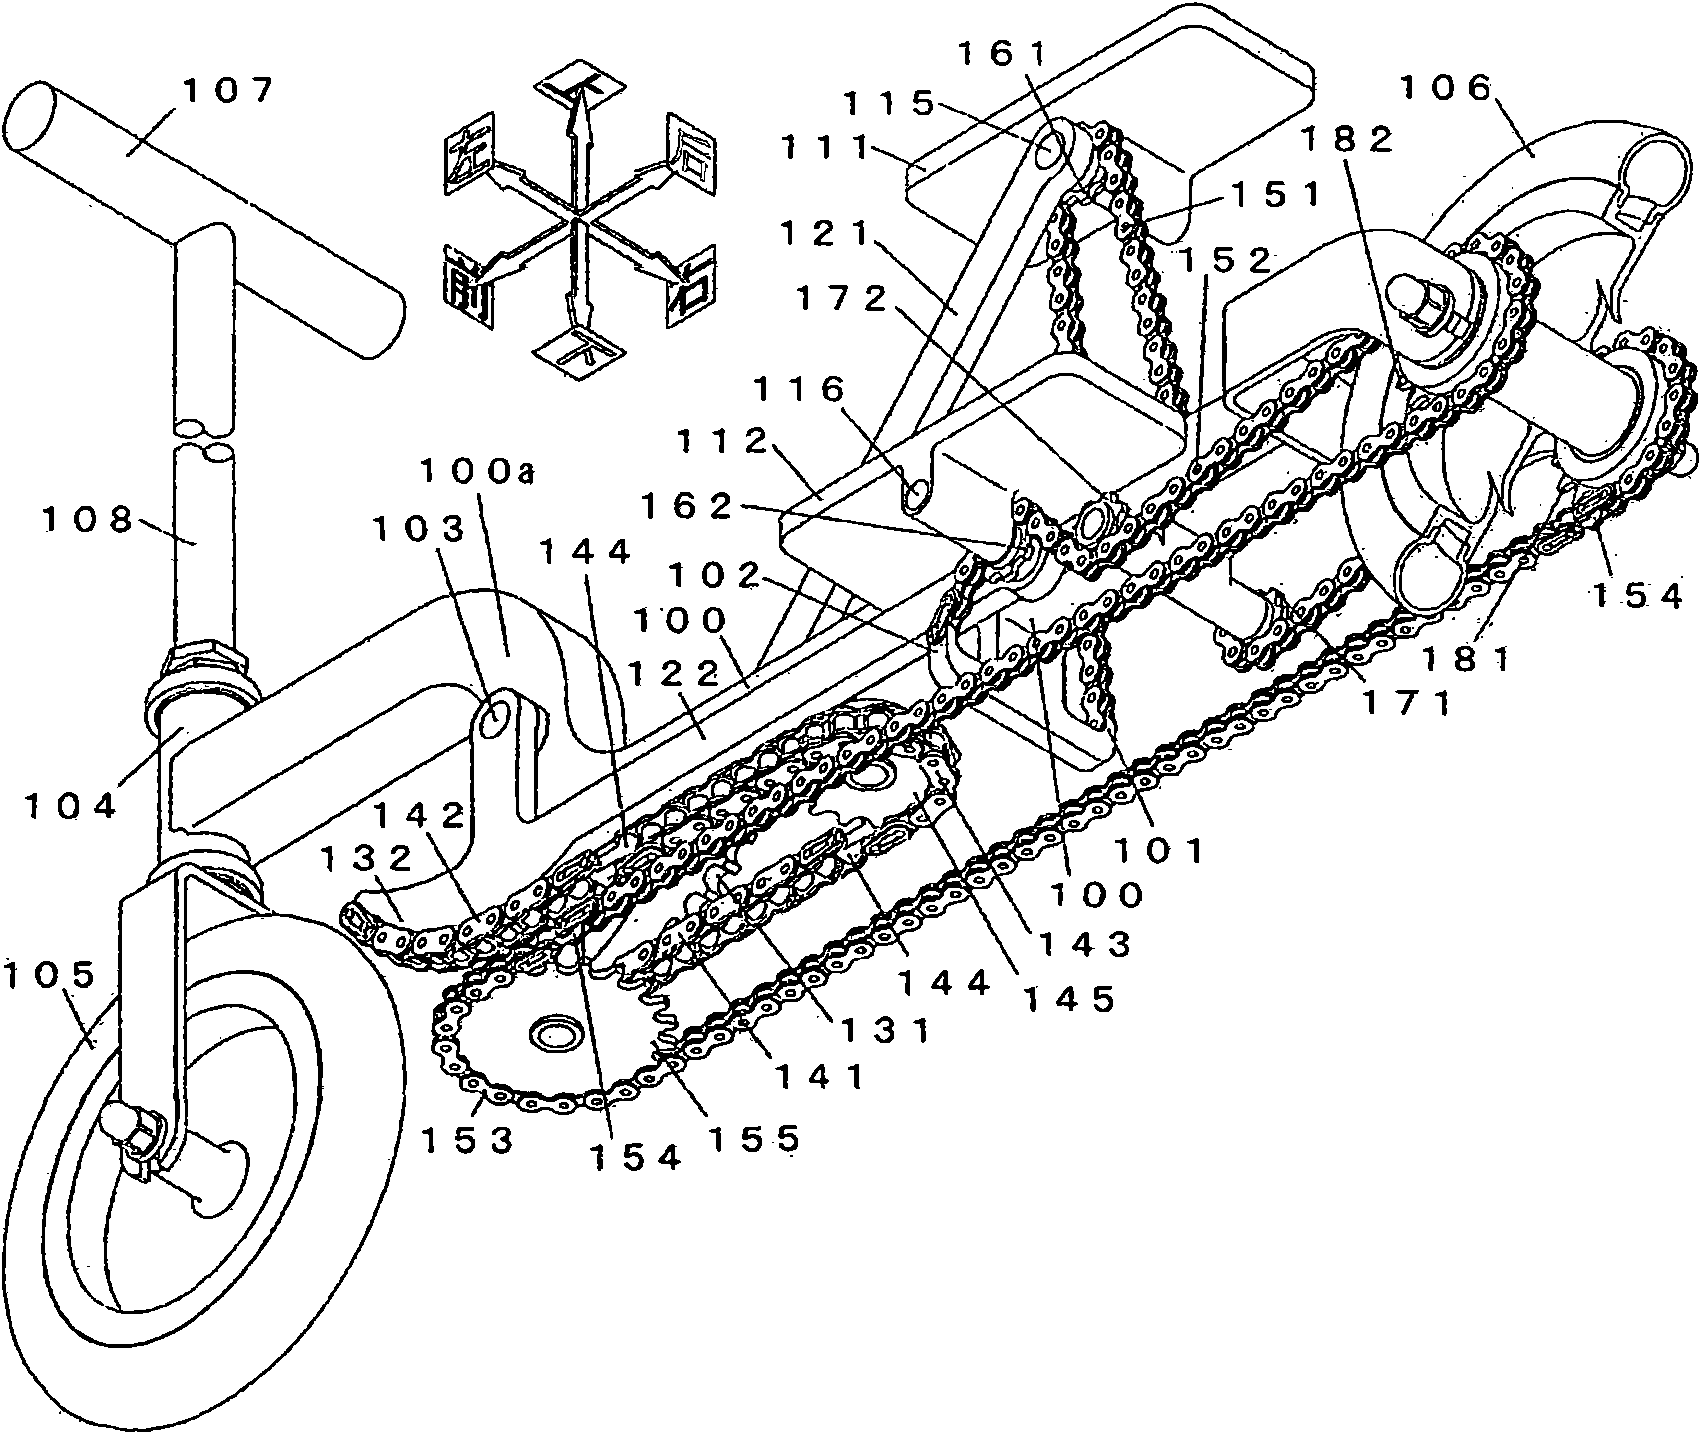 Structure of stand-riding bicycle